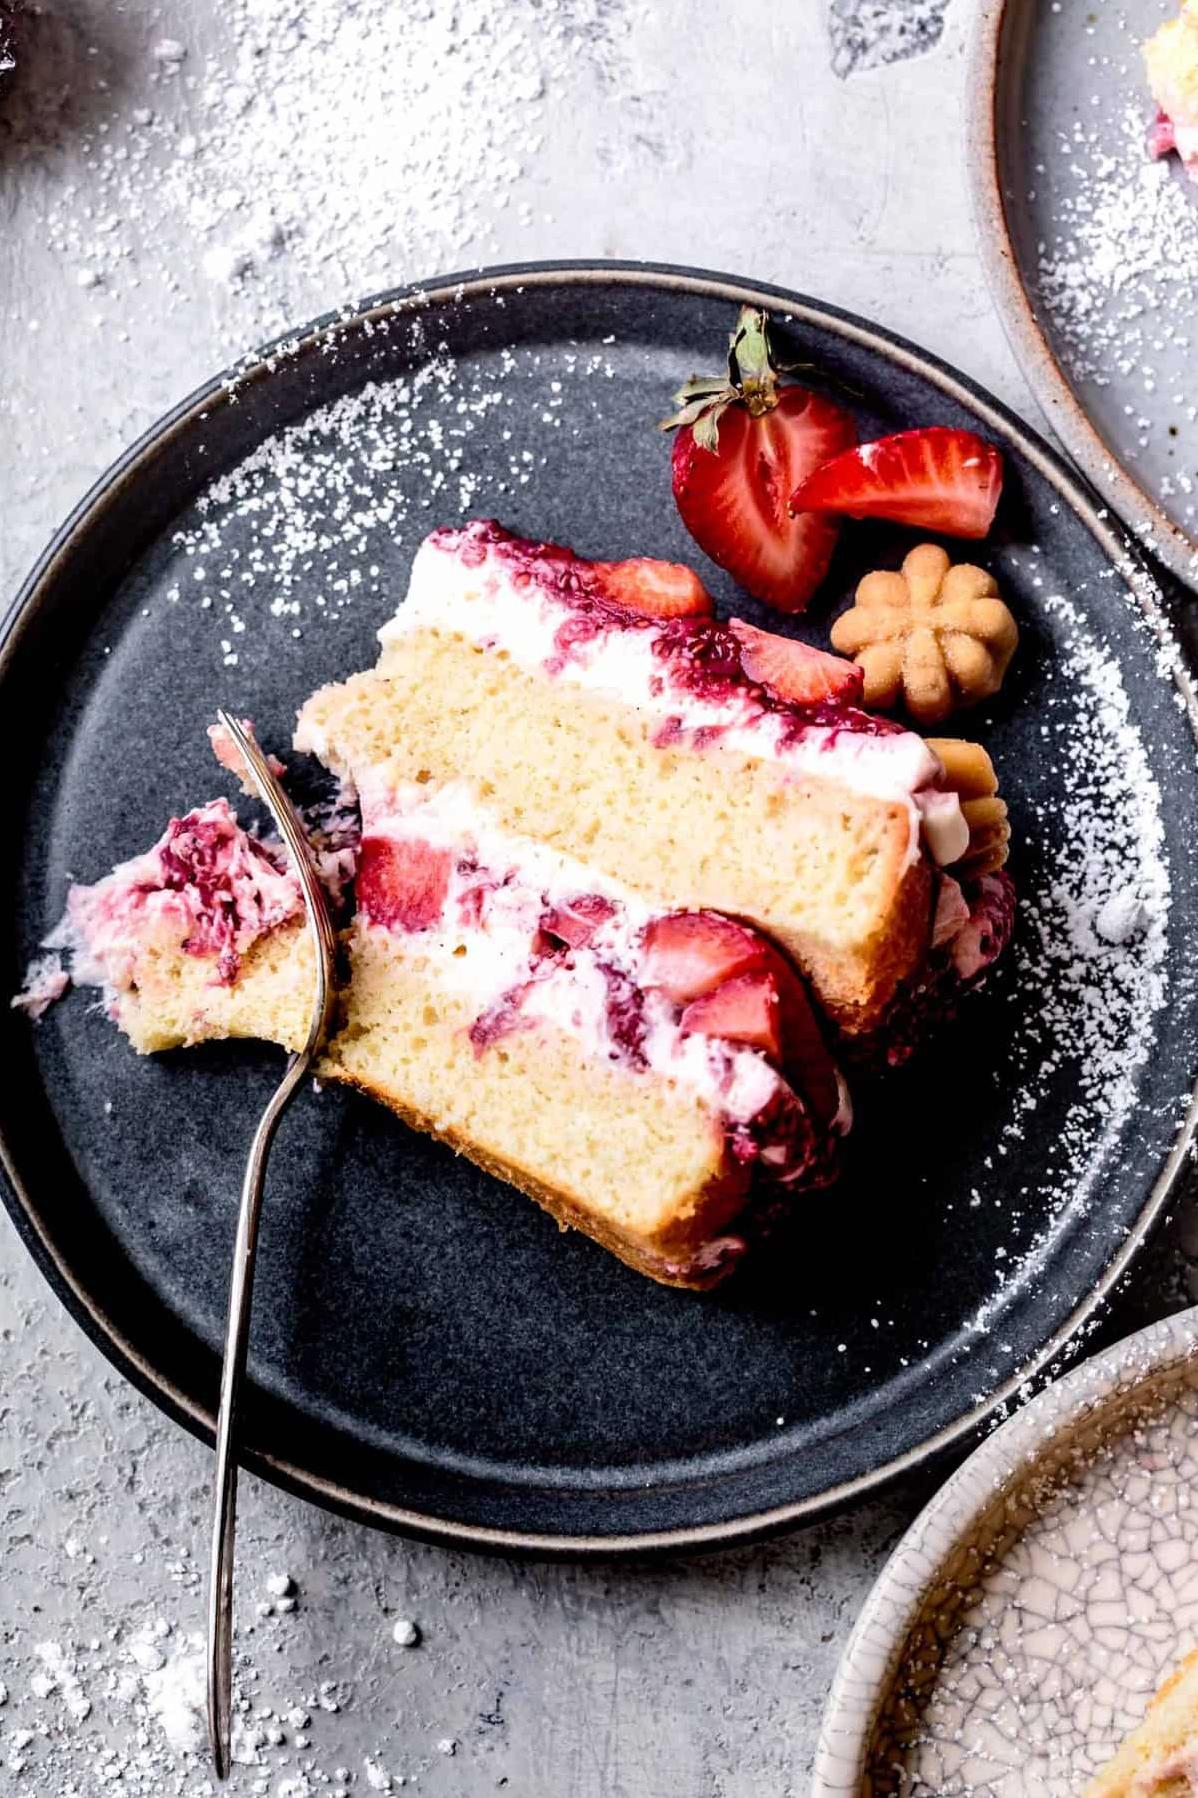  Get ready to sink your teeth into this light, fluffy and gluten-free Fruit Sponge!